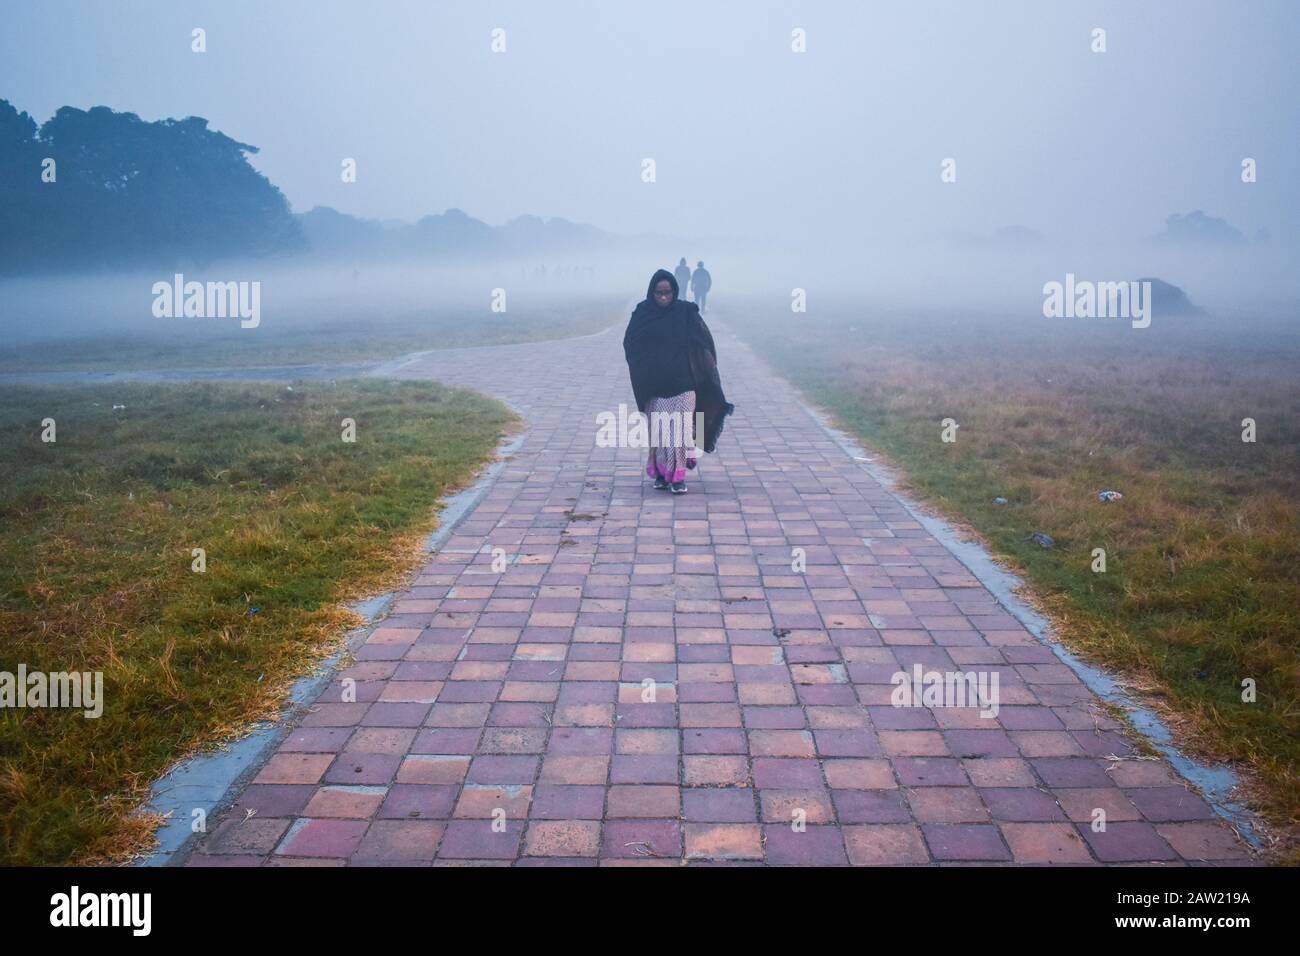 A woman is walking in a winter morning on Maidan ground in Kolkata, India. Stock Photo